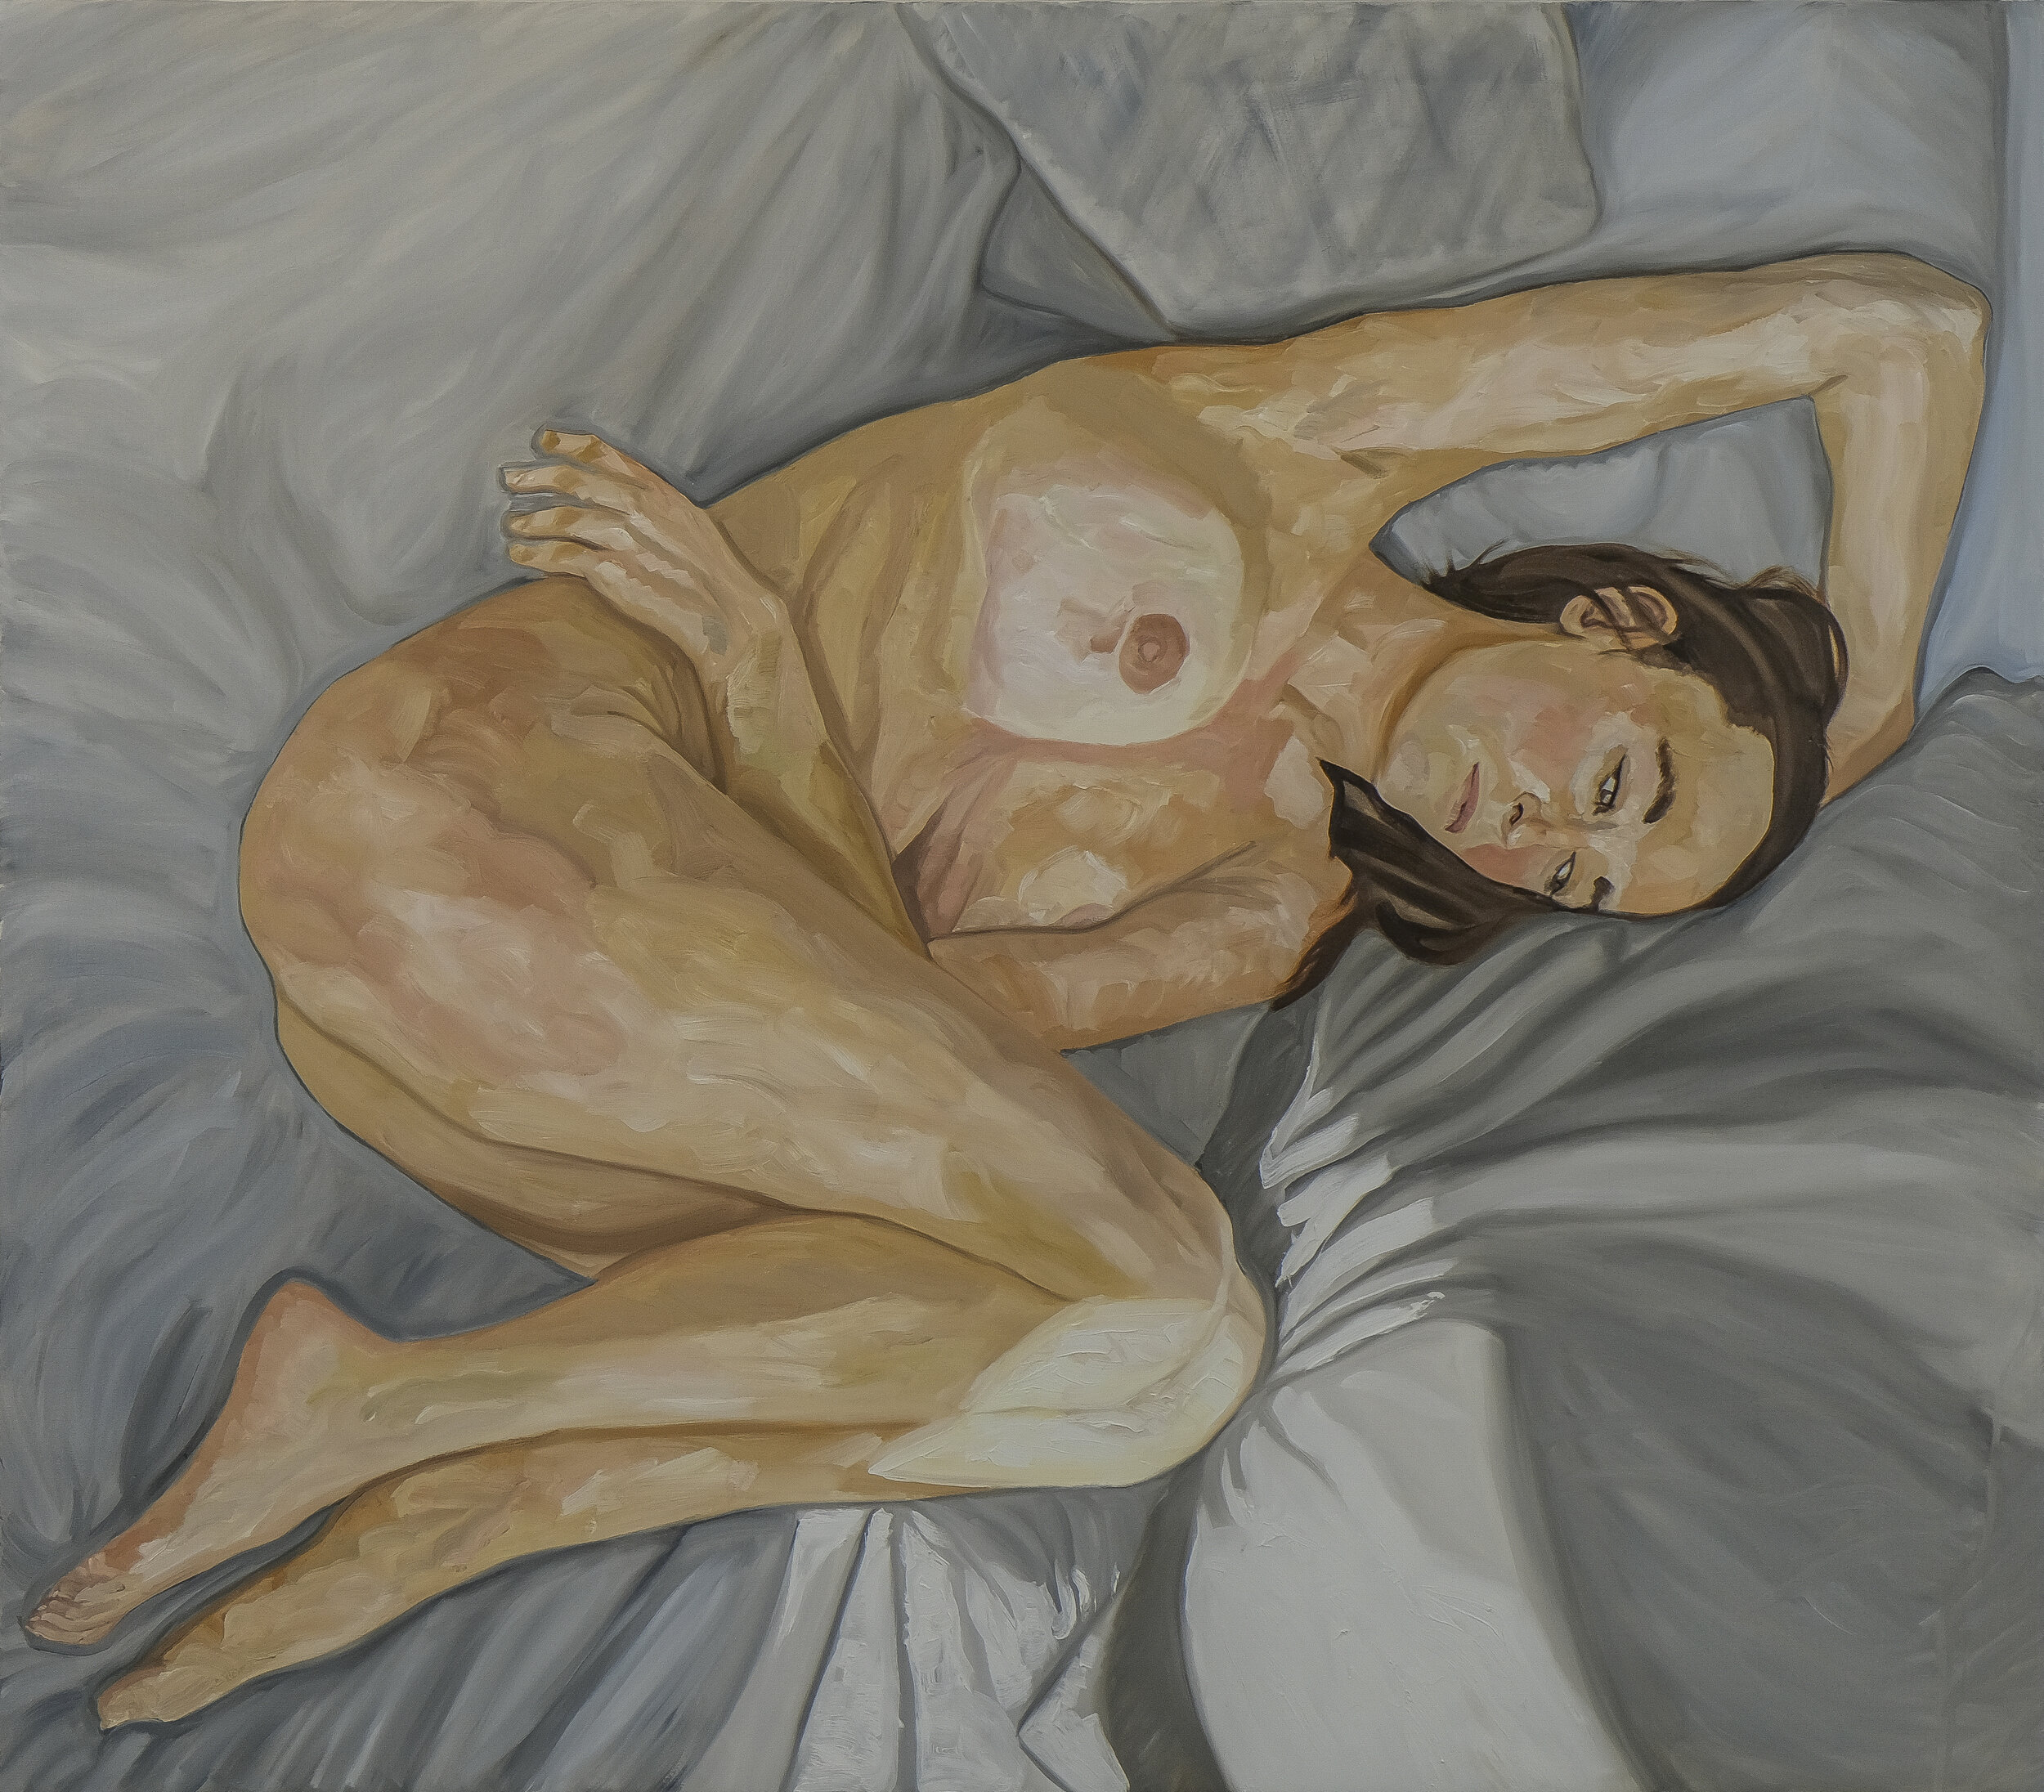   Phoebe in Streaming Sunlight   2021  Oil on canvas  160cm x 140cm 